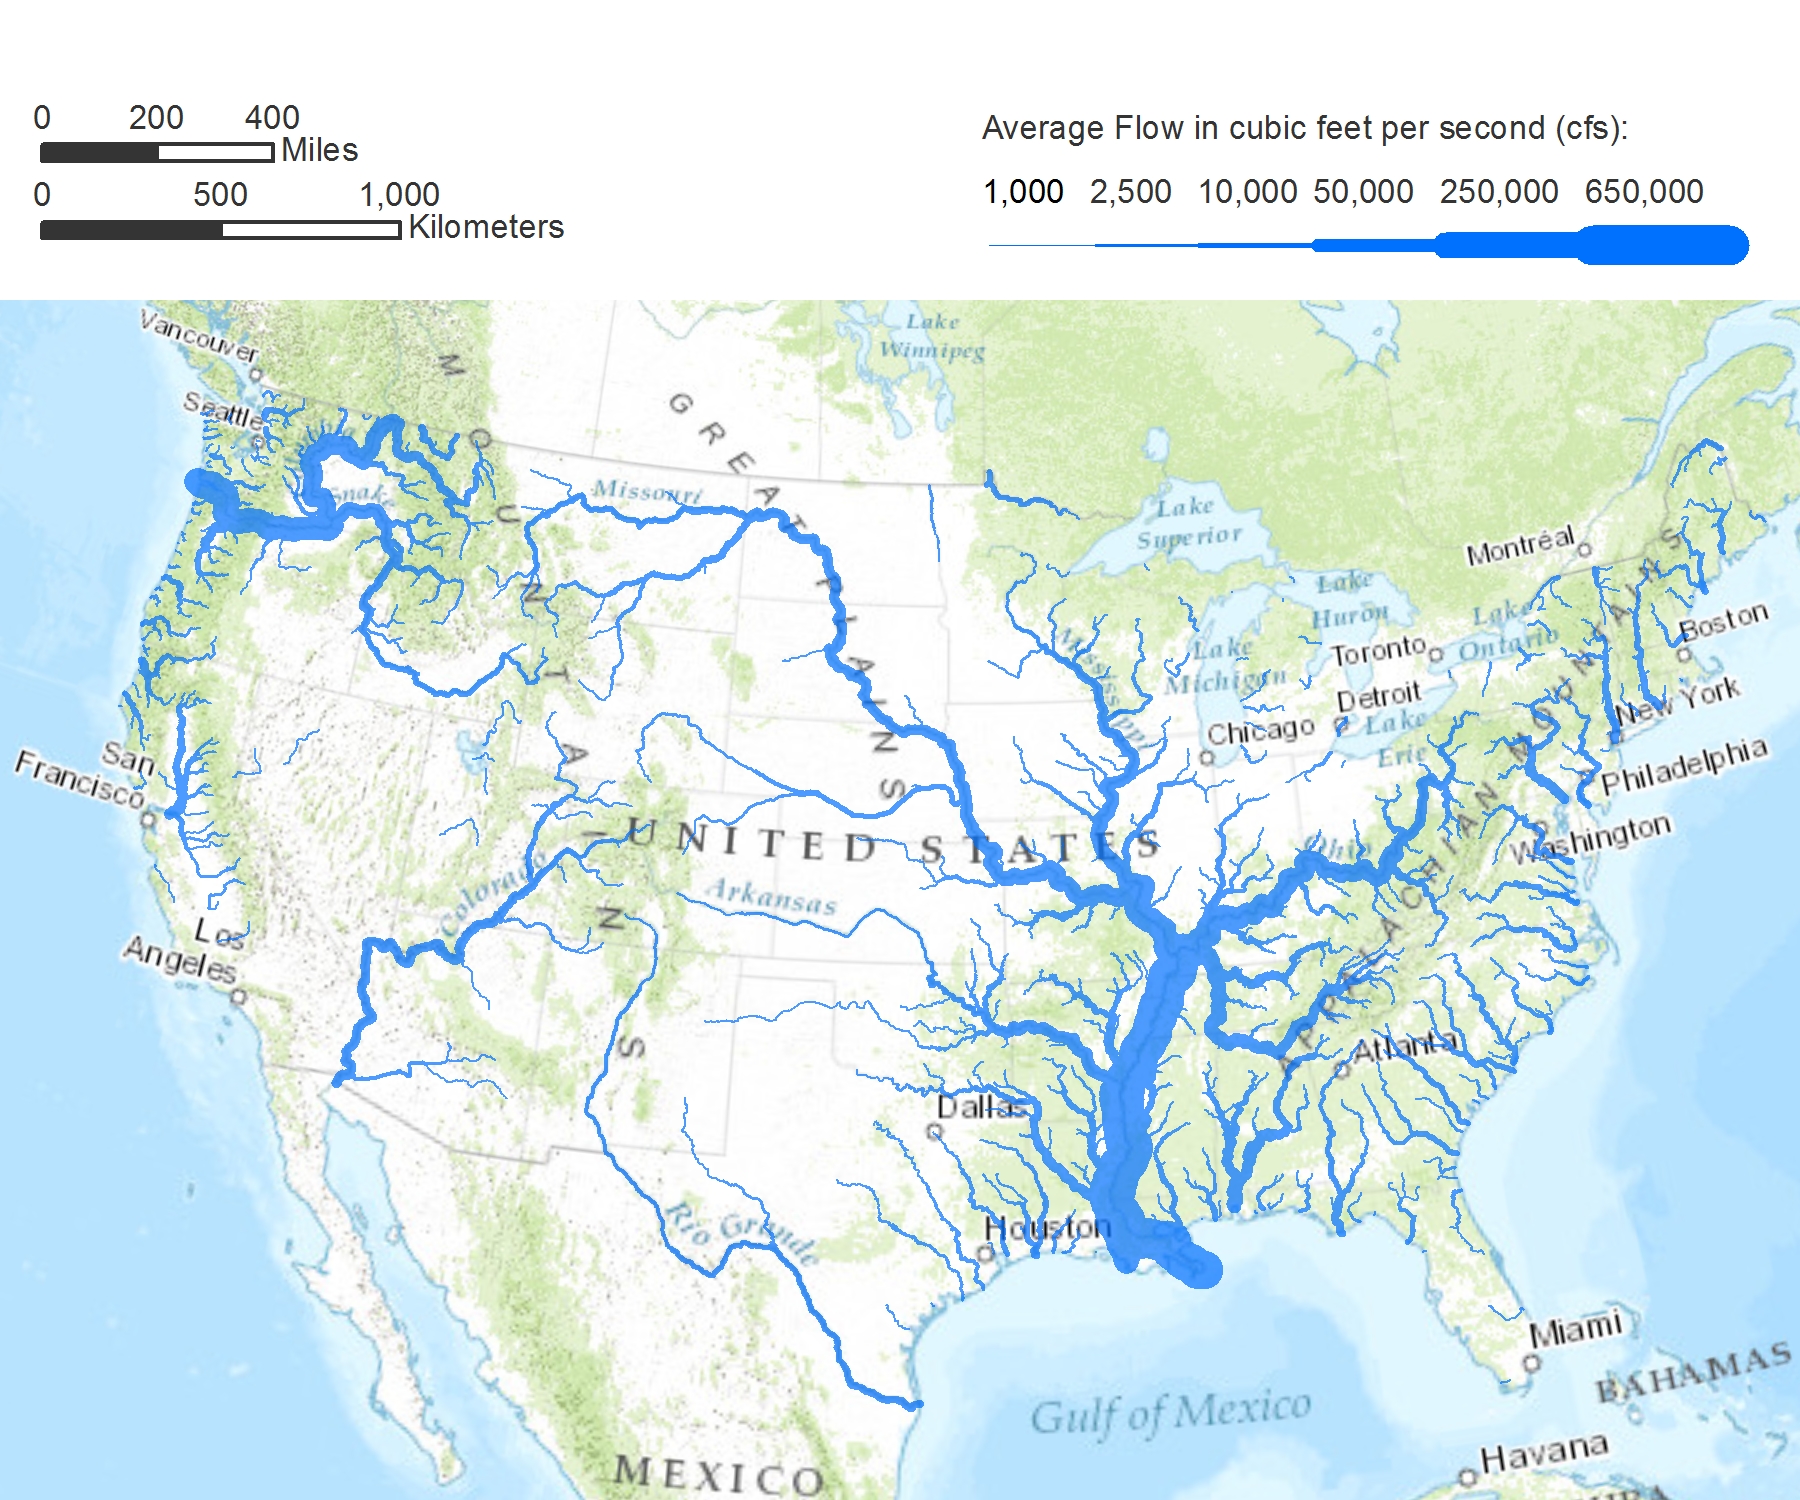 Caption: Major rivers of the 48 contiguous United States, scaled by average flow. The symbols drawn here have widths proportional to the square root of the rivers’ estimated average annual discharge. Only rivers with discharge above 1,000 cfs are shown. Data from NHDPlus v2. Background map by ESRI. Map projection: Albers equal-area conic. Prepared by Matthew Heberger (2013)*. 